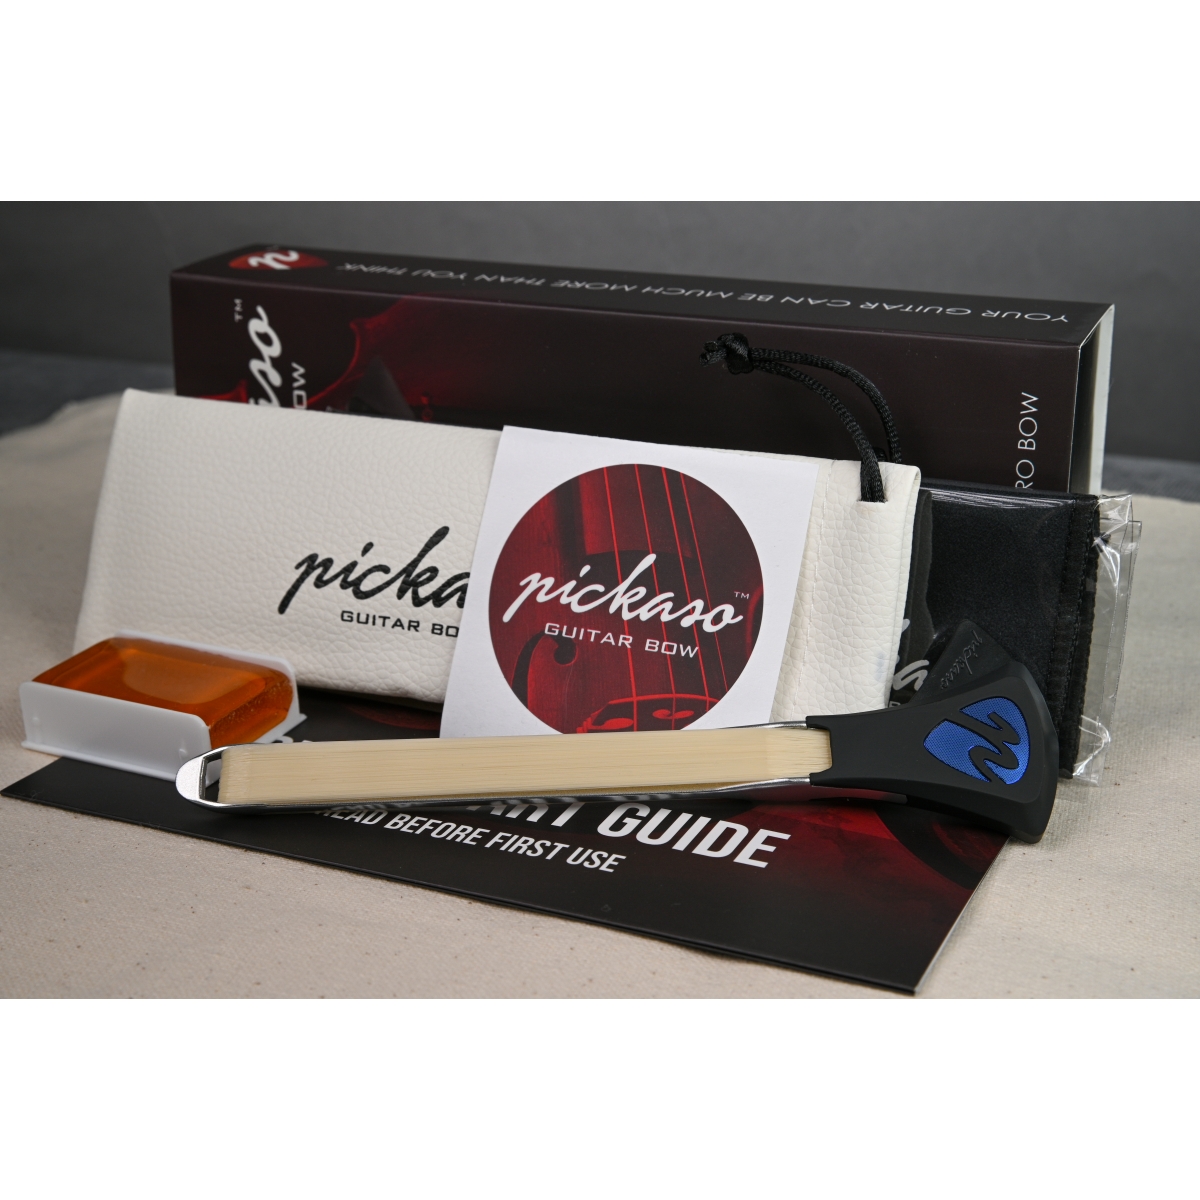 How good is the Pickaso Bow Guitar bow? 